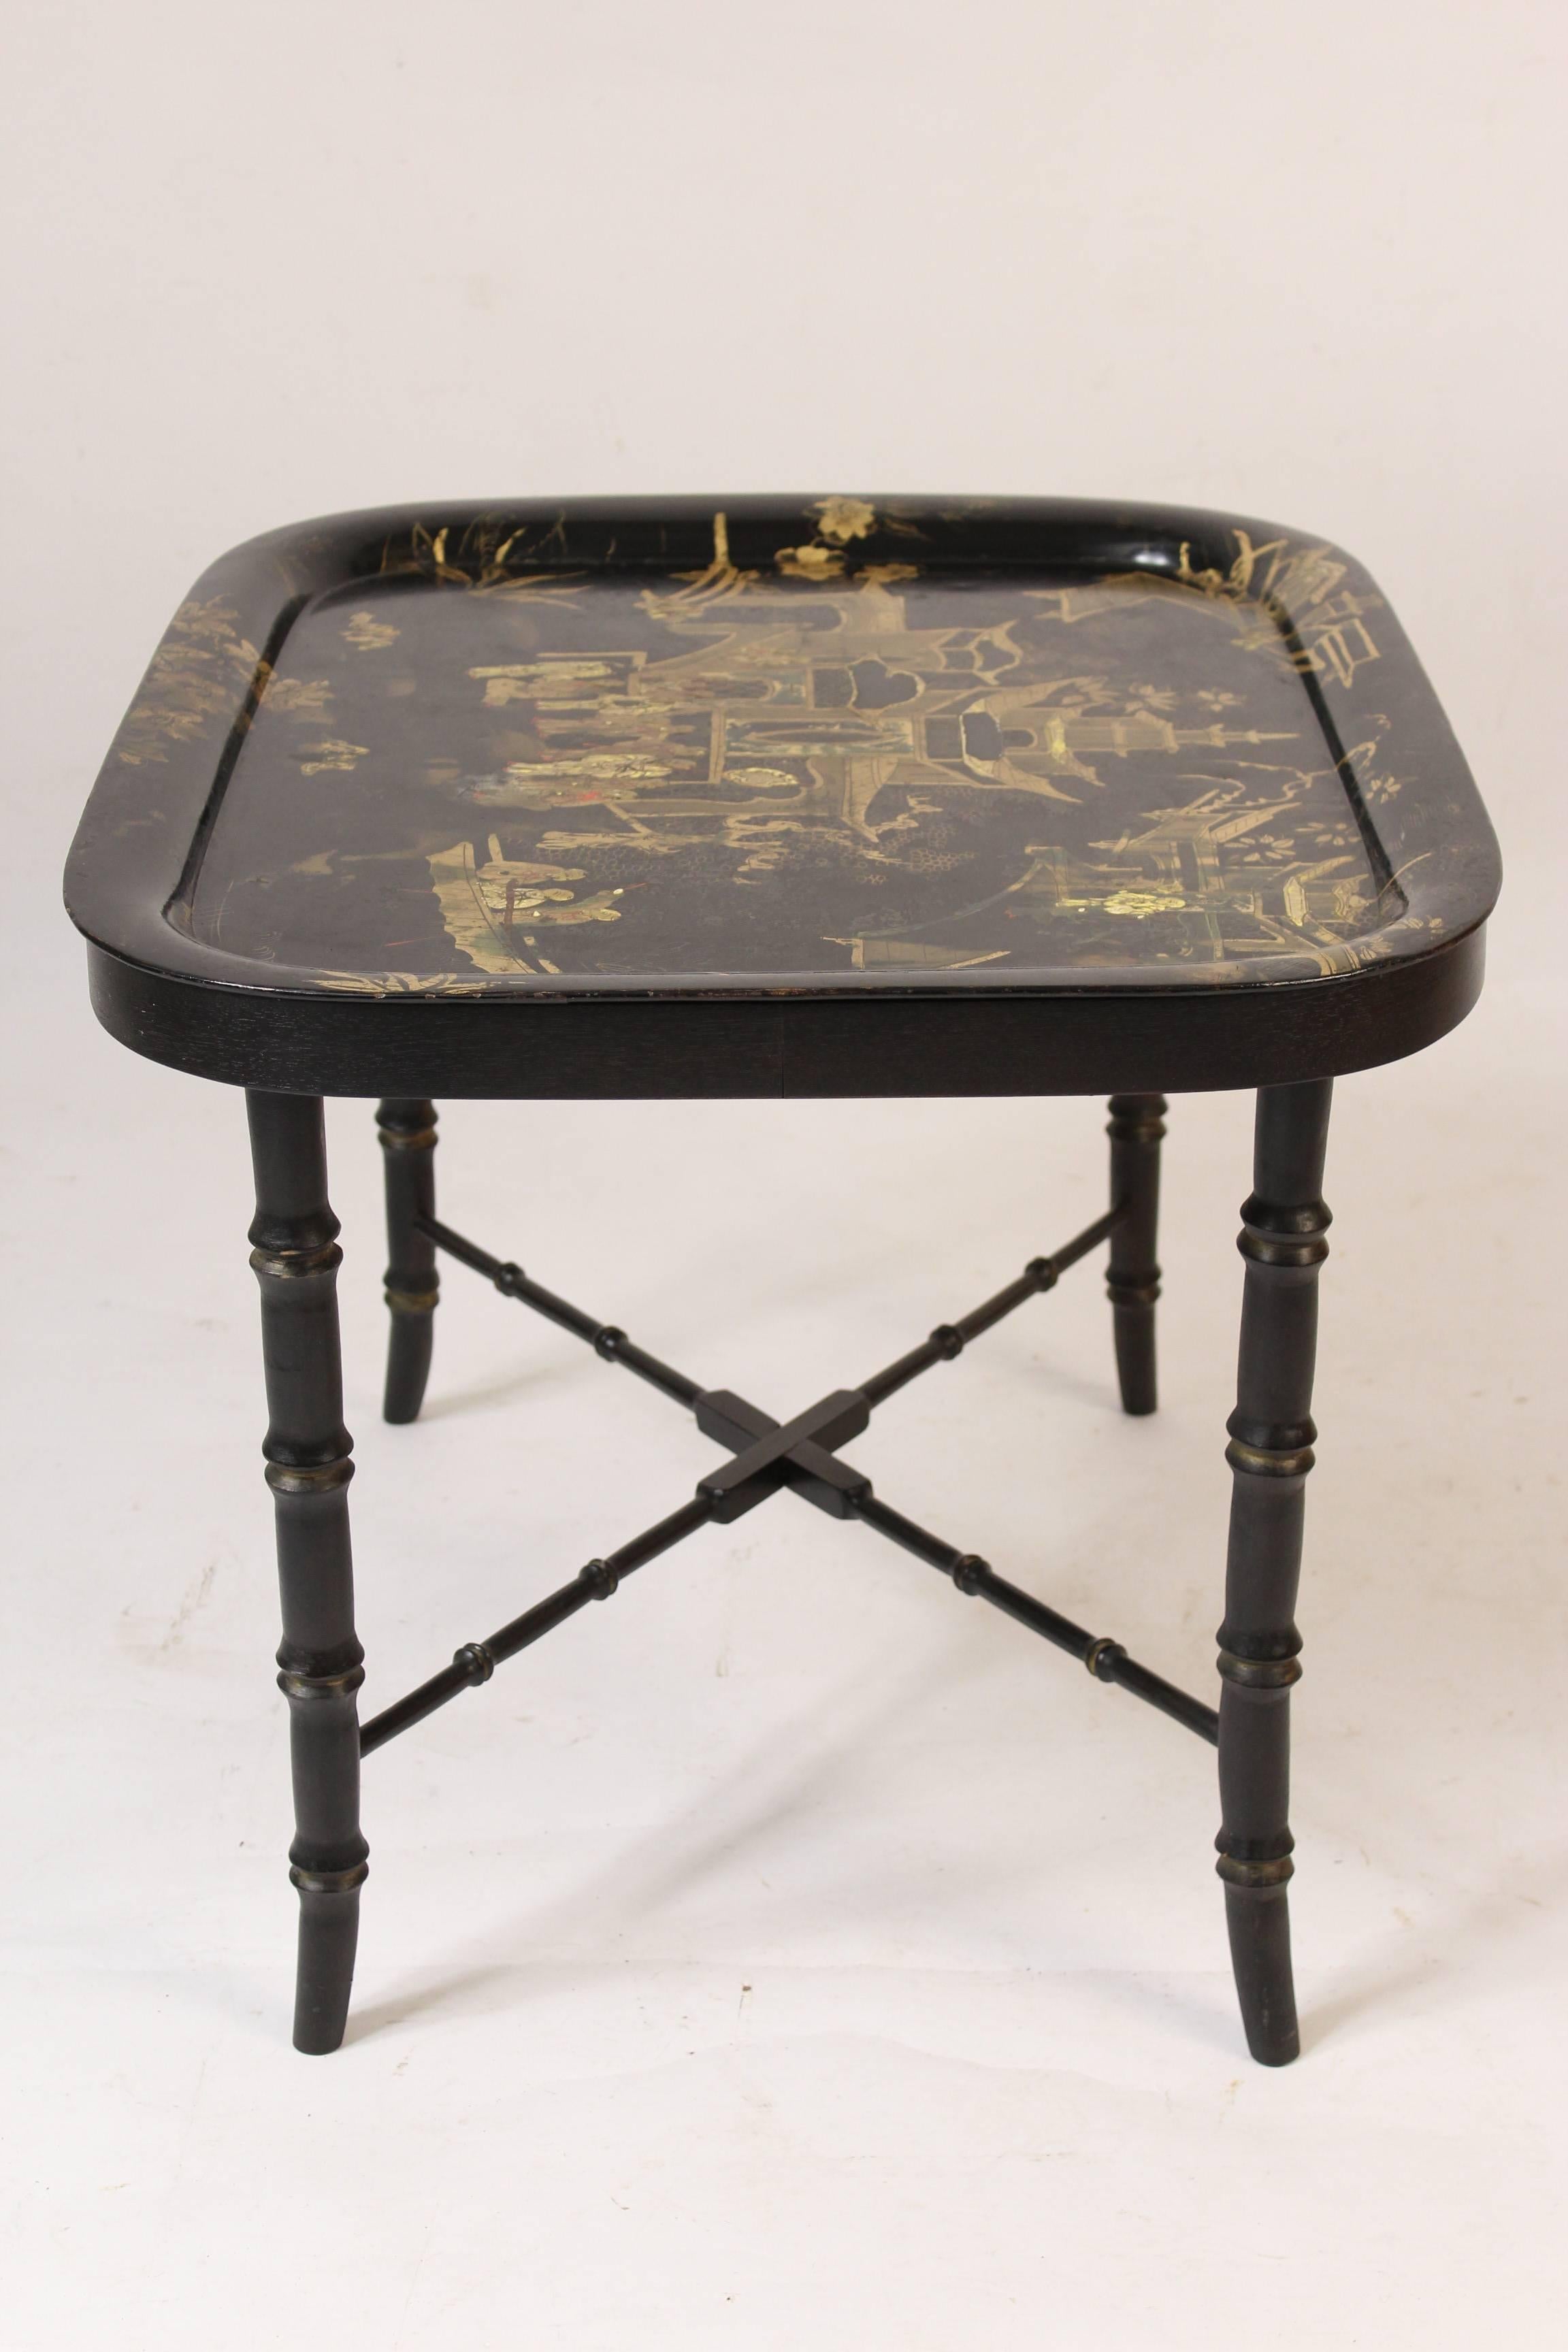 Chinoiserie Decorated Tole Tray Table on a Regency Style Bamboo Turned Stand 1